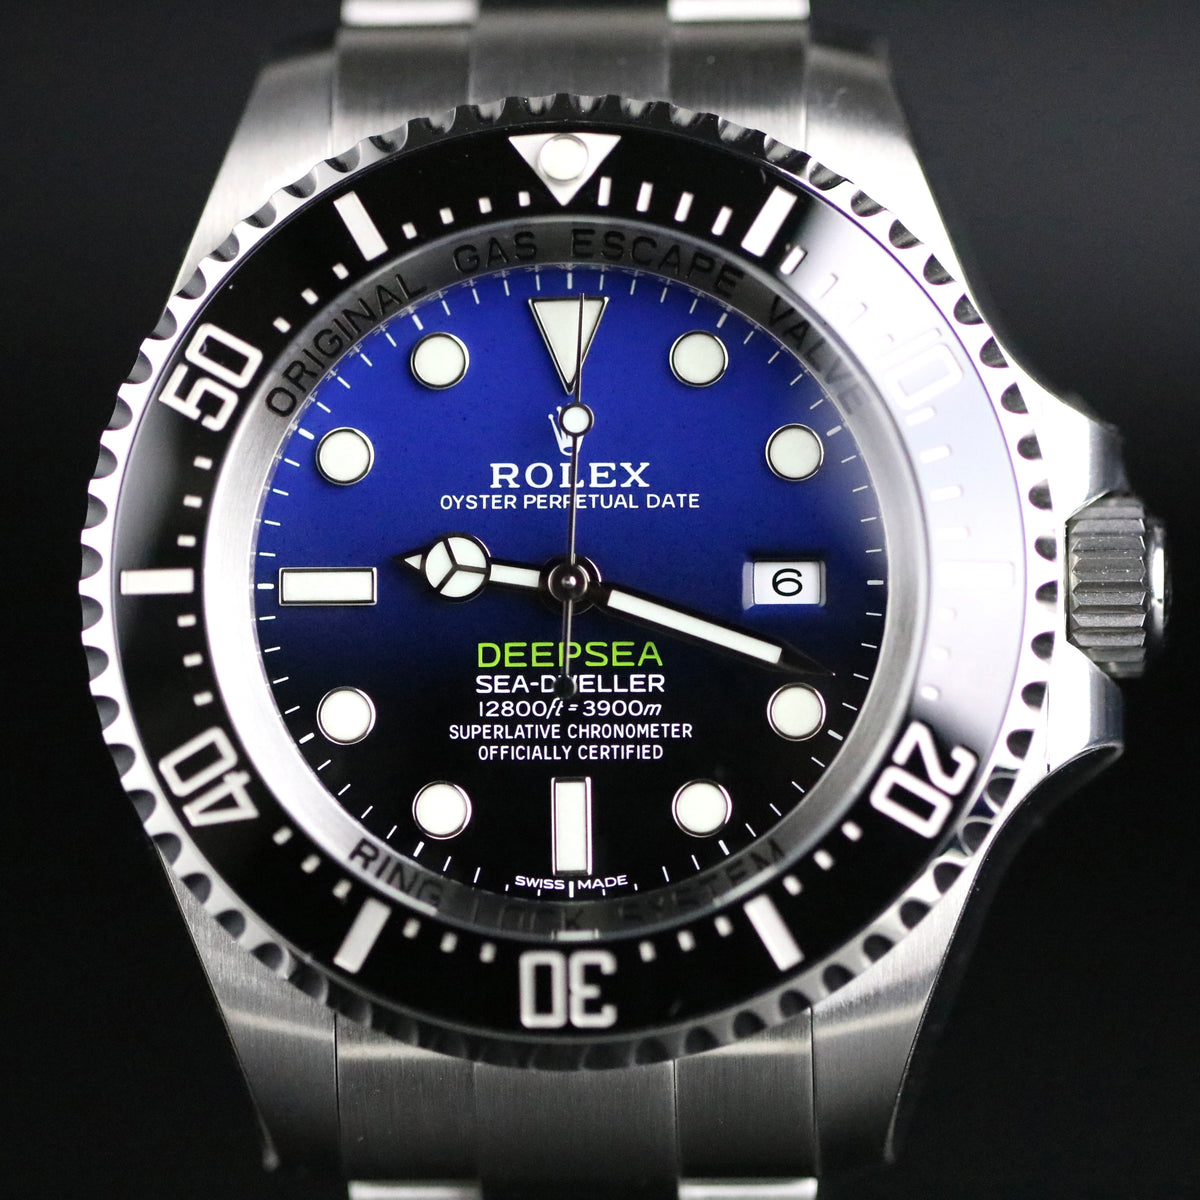 NOS 2018 Rolex 116660 Deepsea D-Blue with Box & Papers